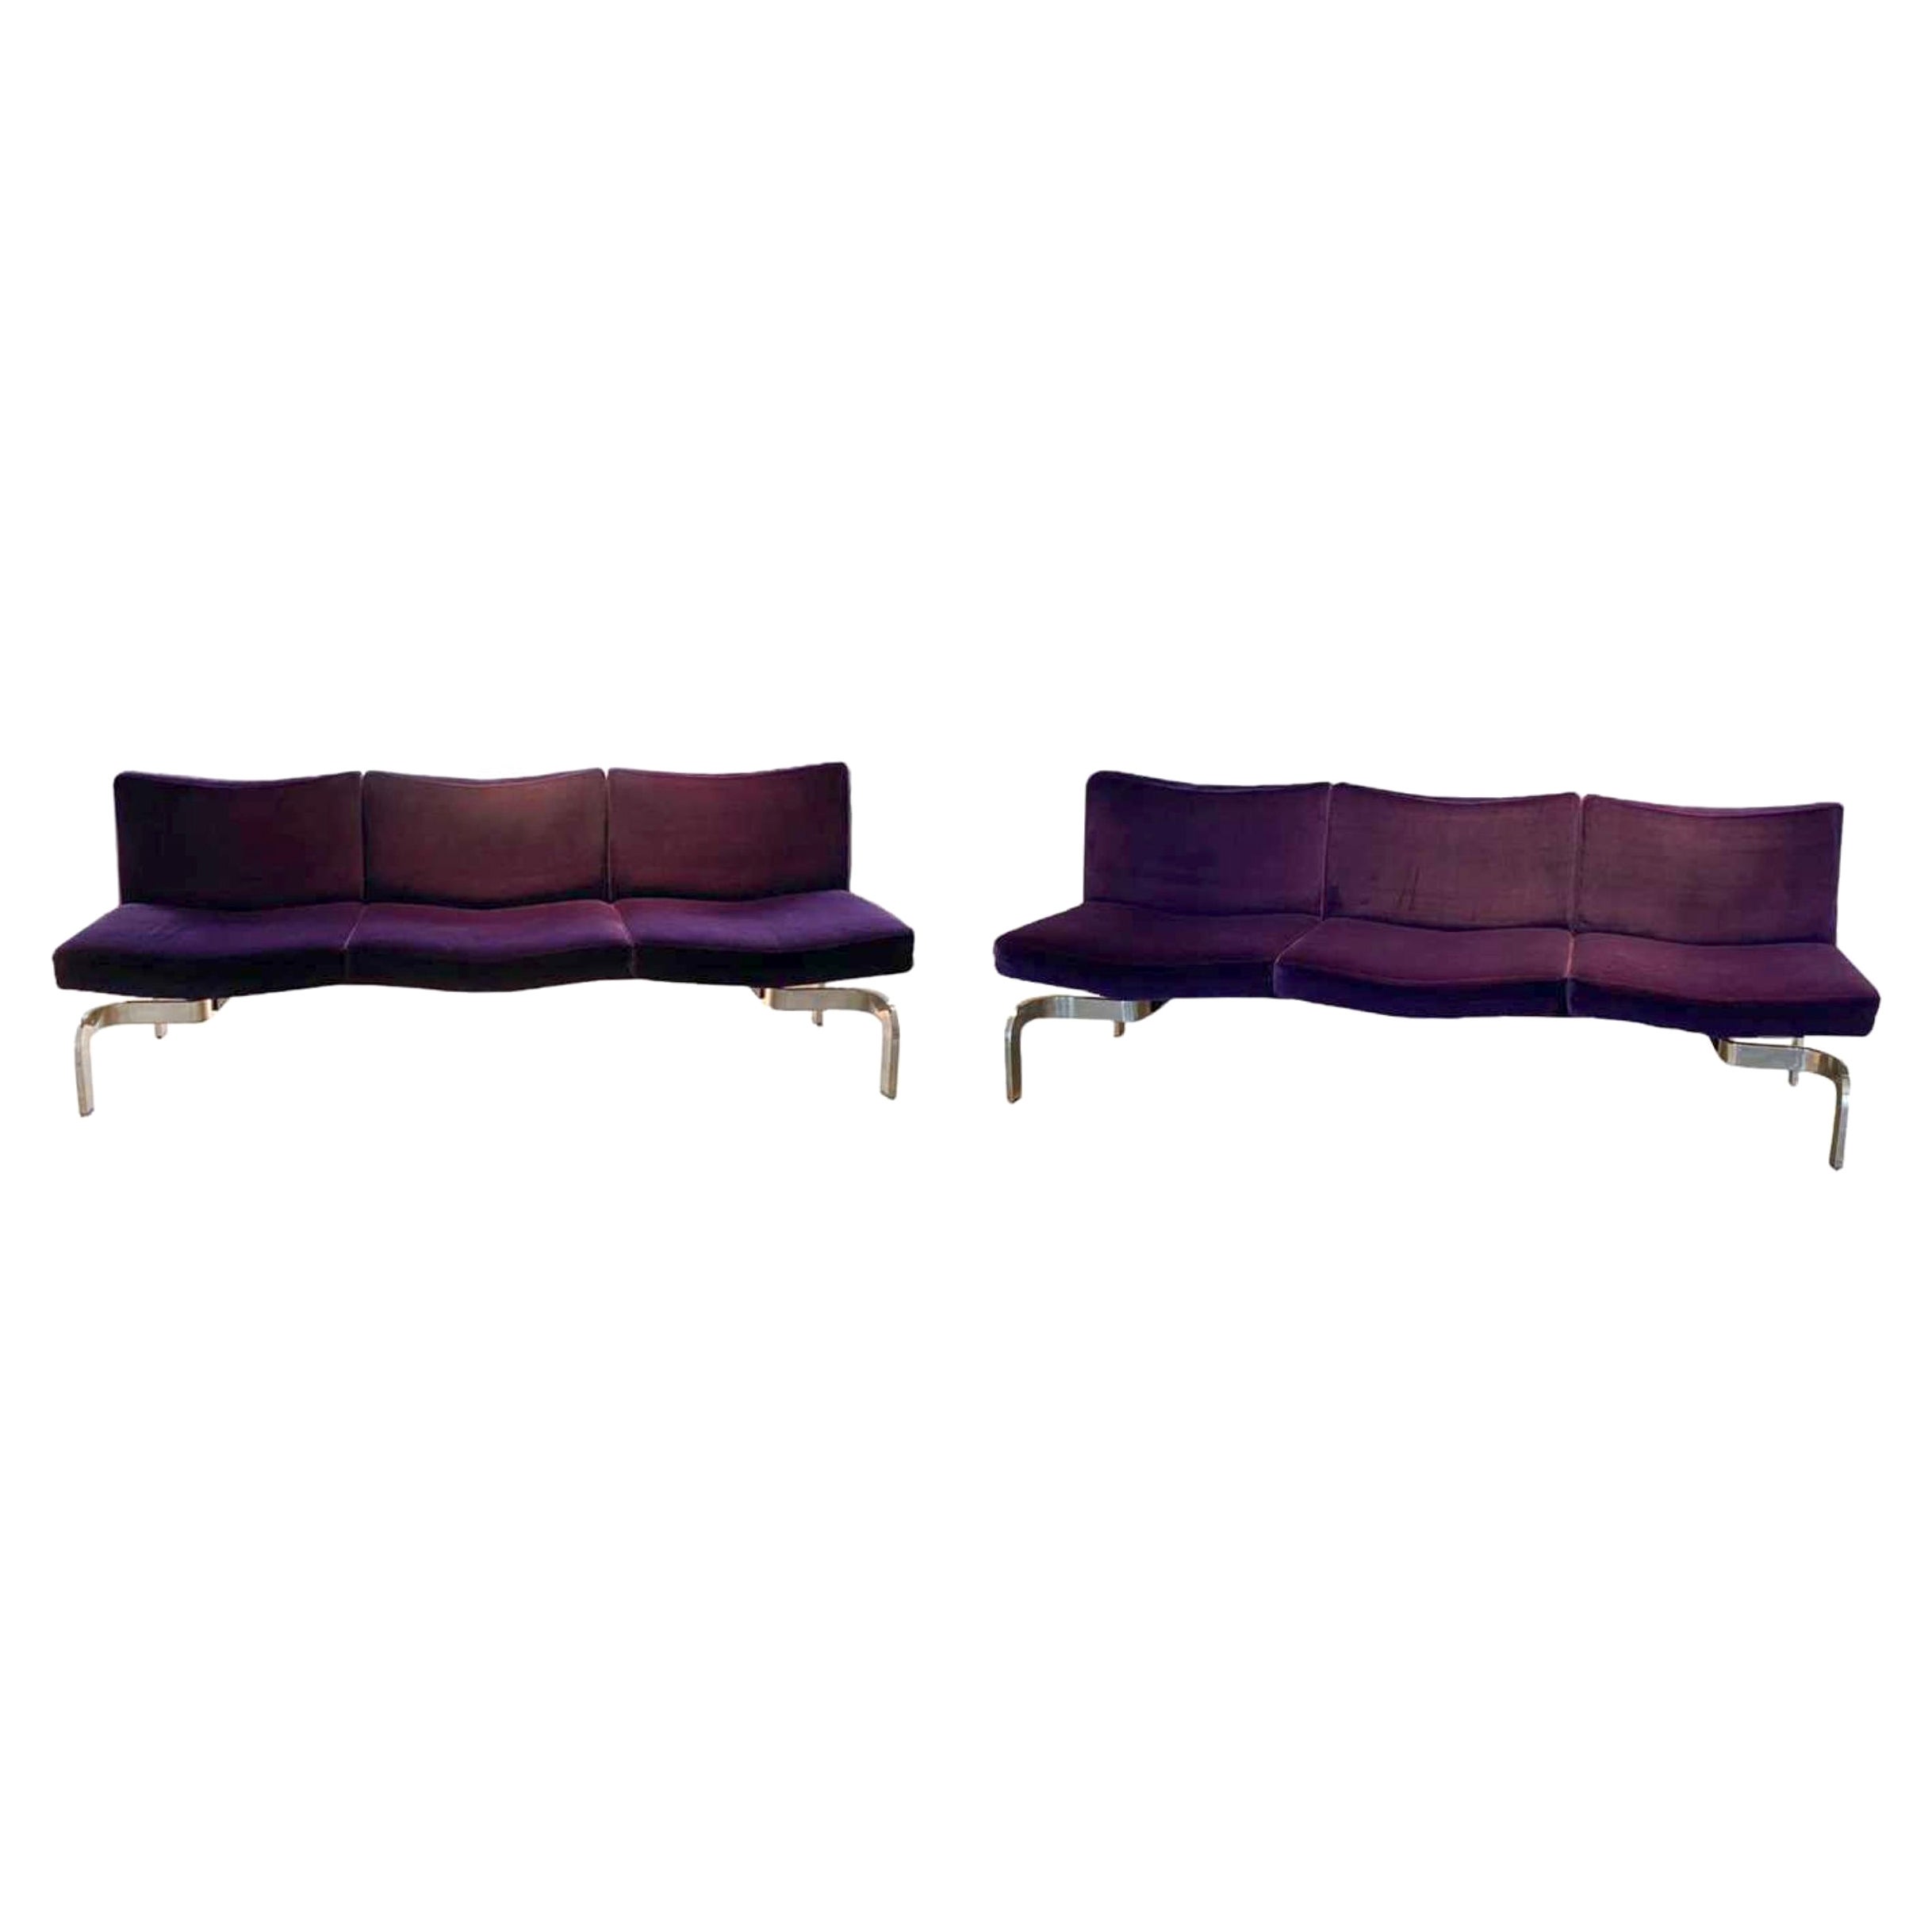 A Pair of Butterfly Sofas Attributed to Maison Jansen